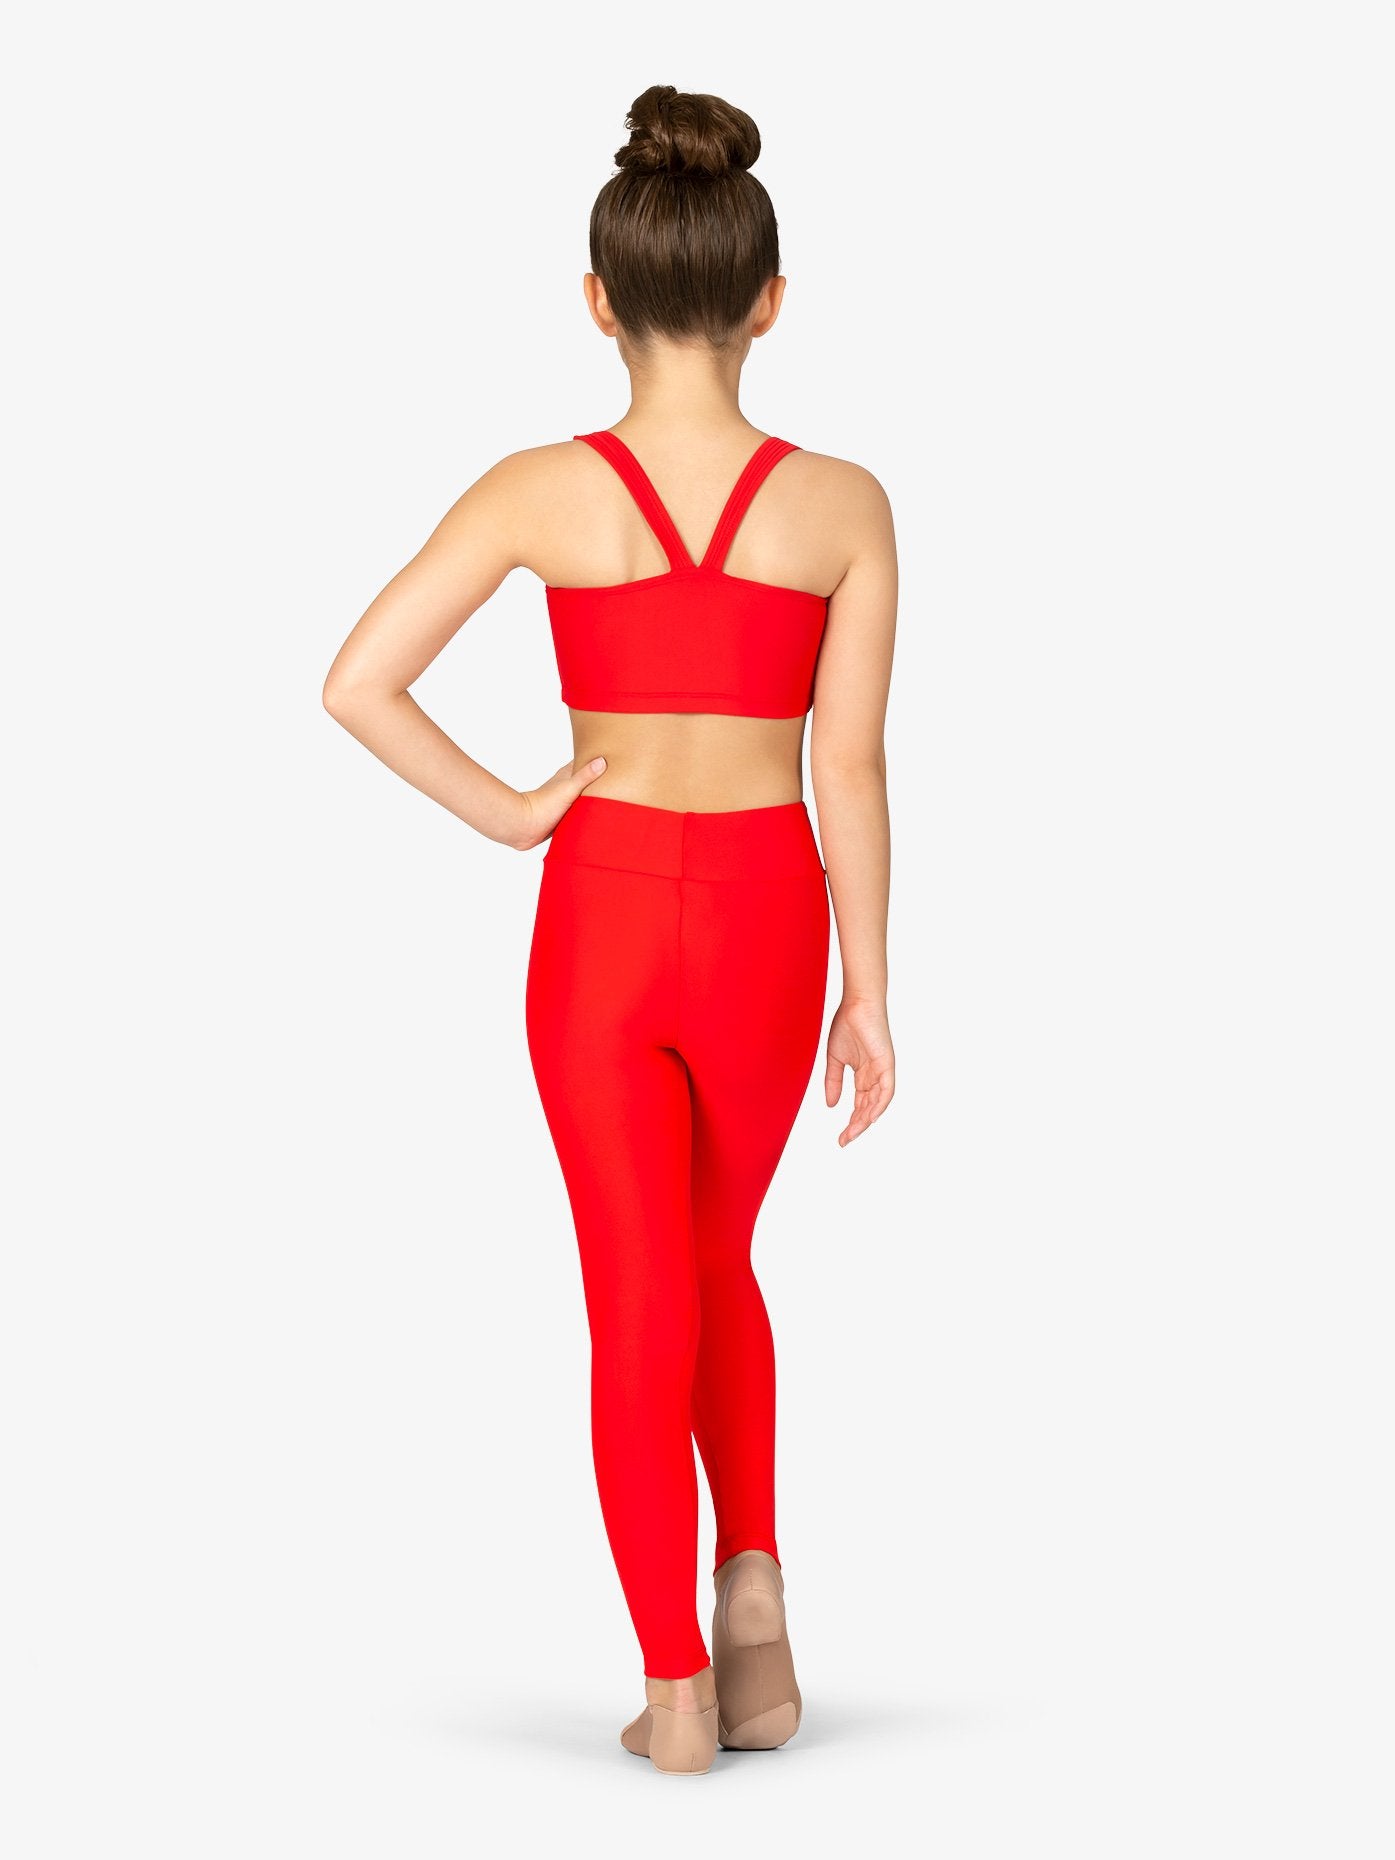 Women’s butter soft red leggings offering comfort and style